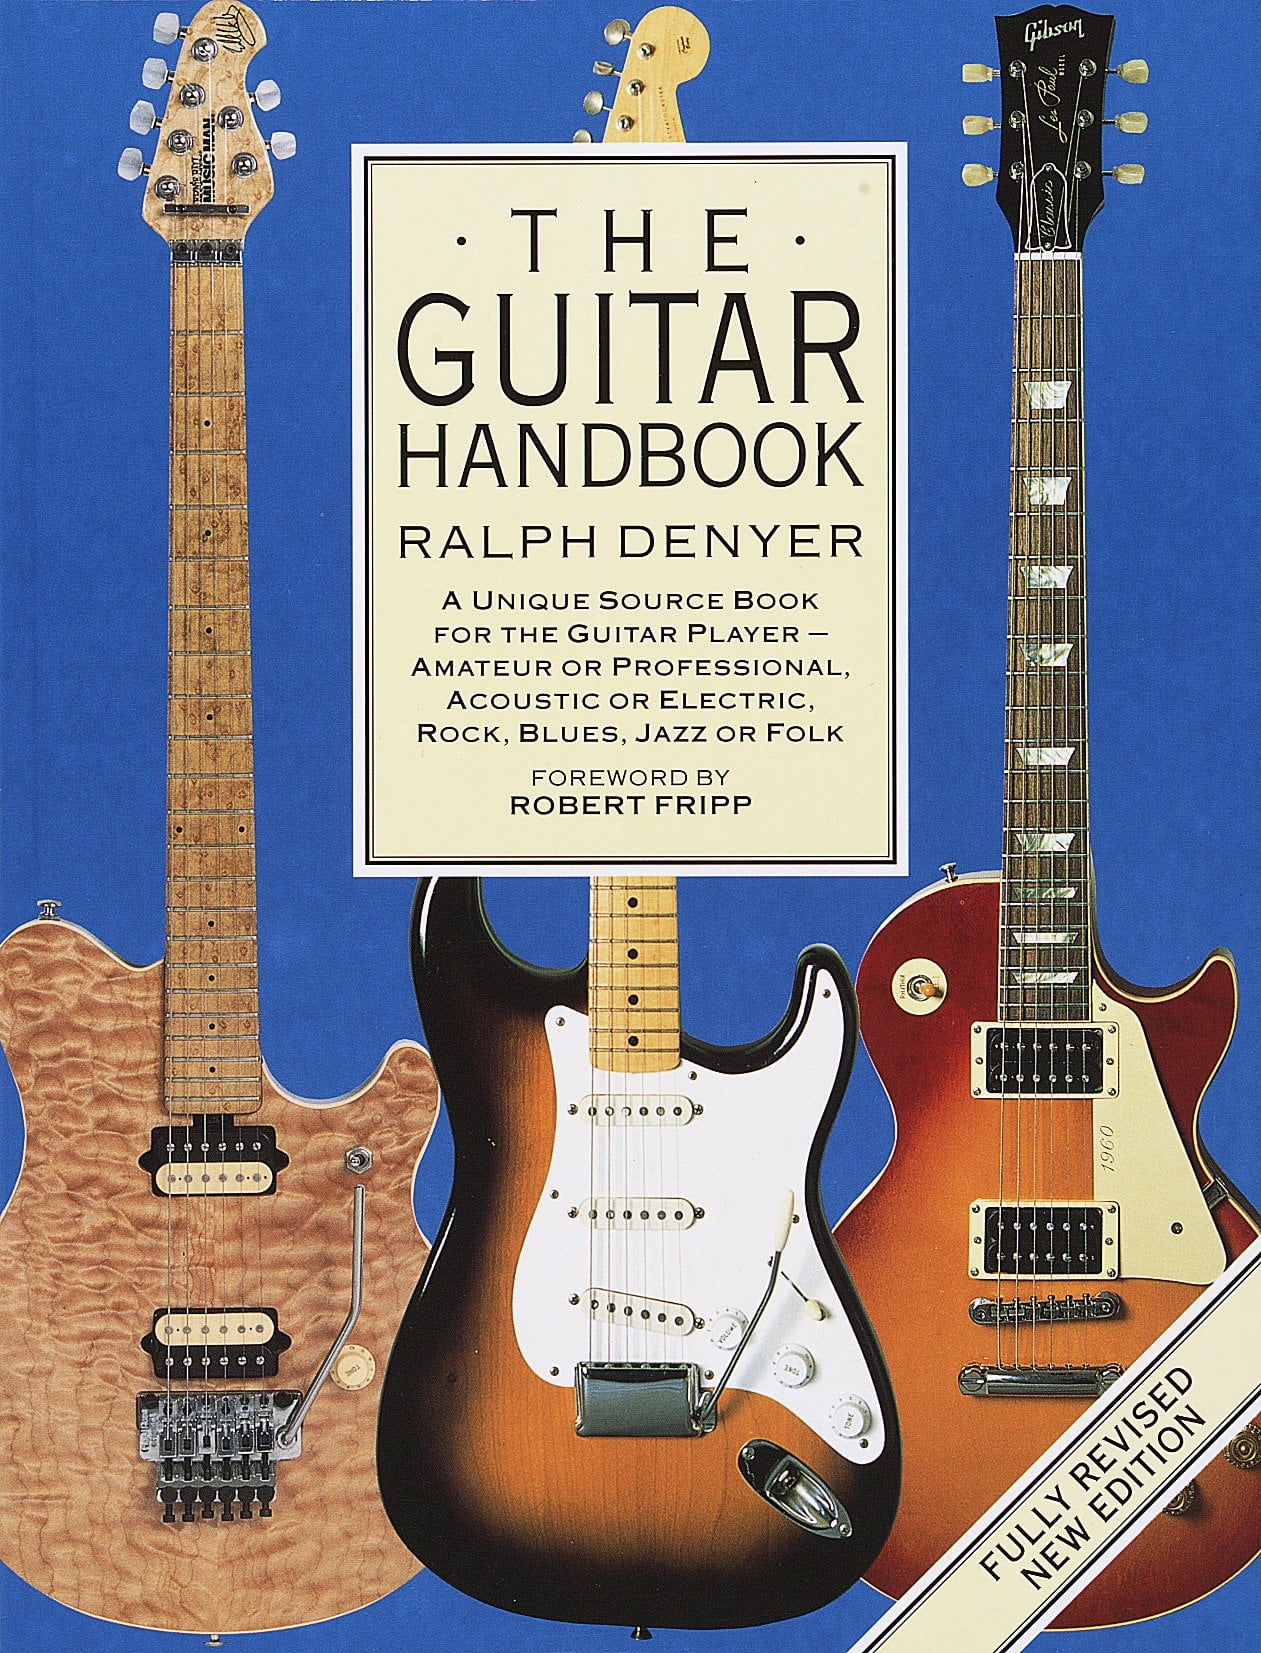 The Guitar Handbook A Unique Source Book for the Guitar Player Amateur
or Professional Acoustic or Electrice Rock Blues Jazz or Folk Epub-Ebook